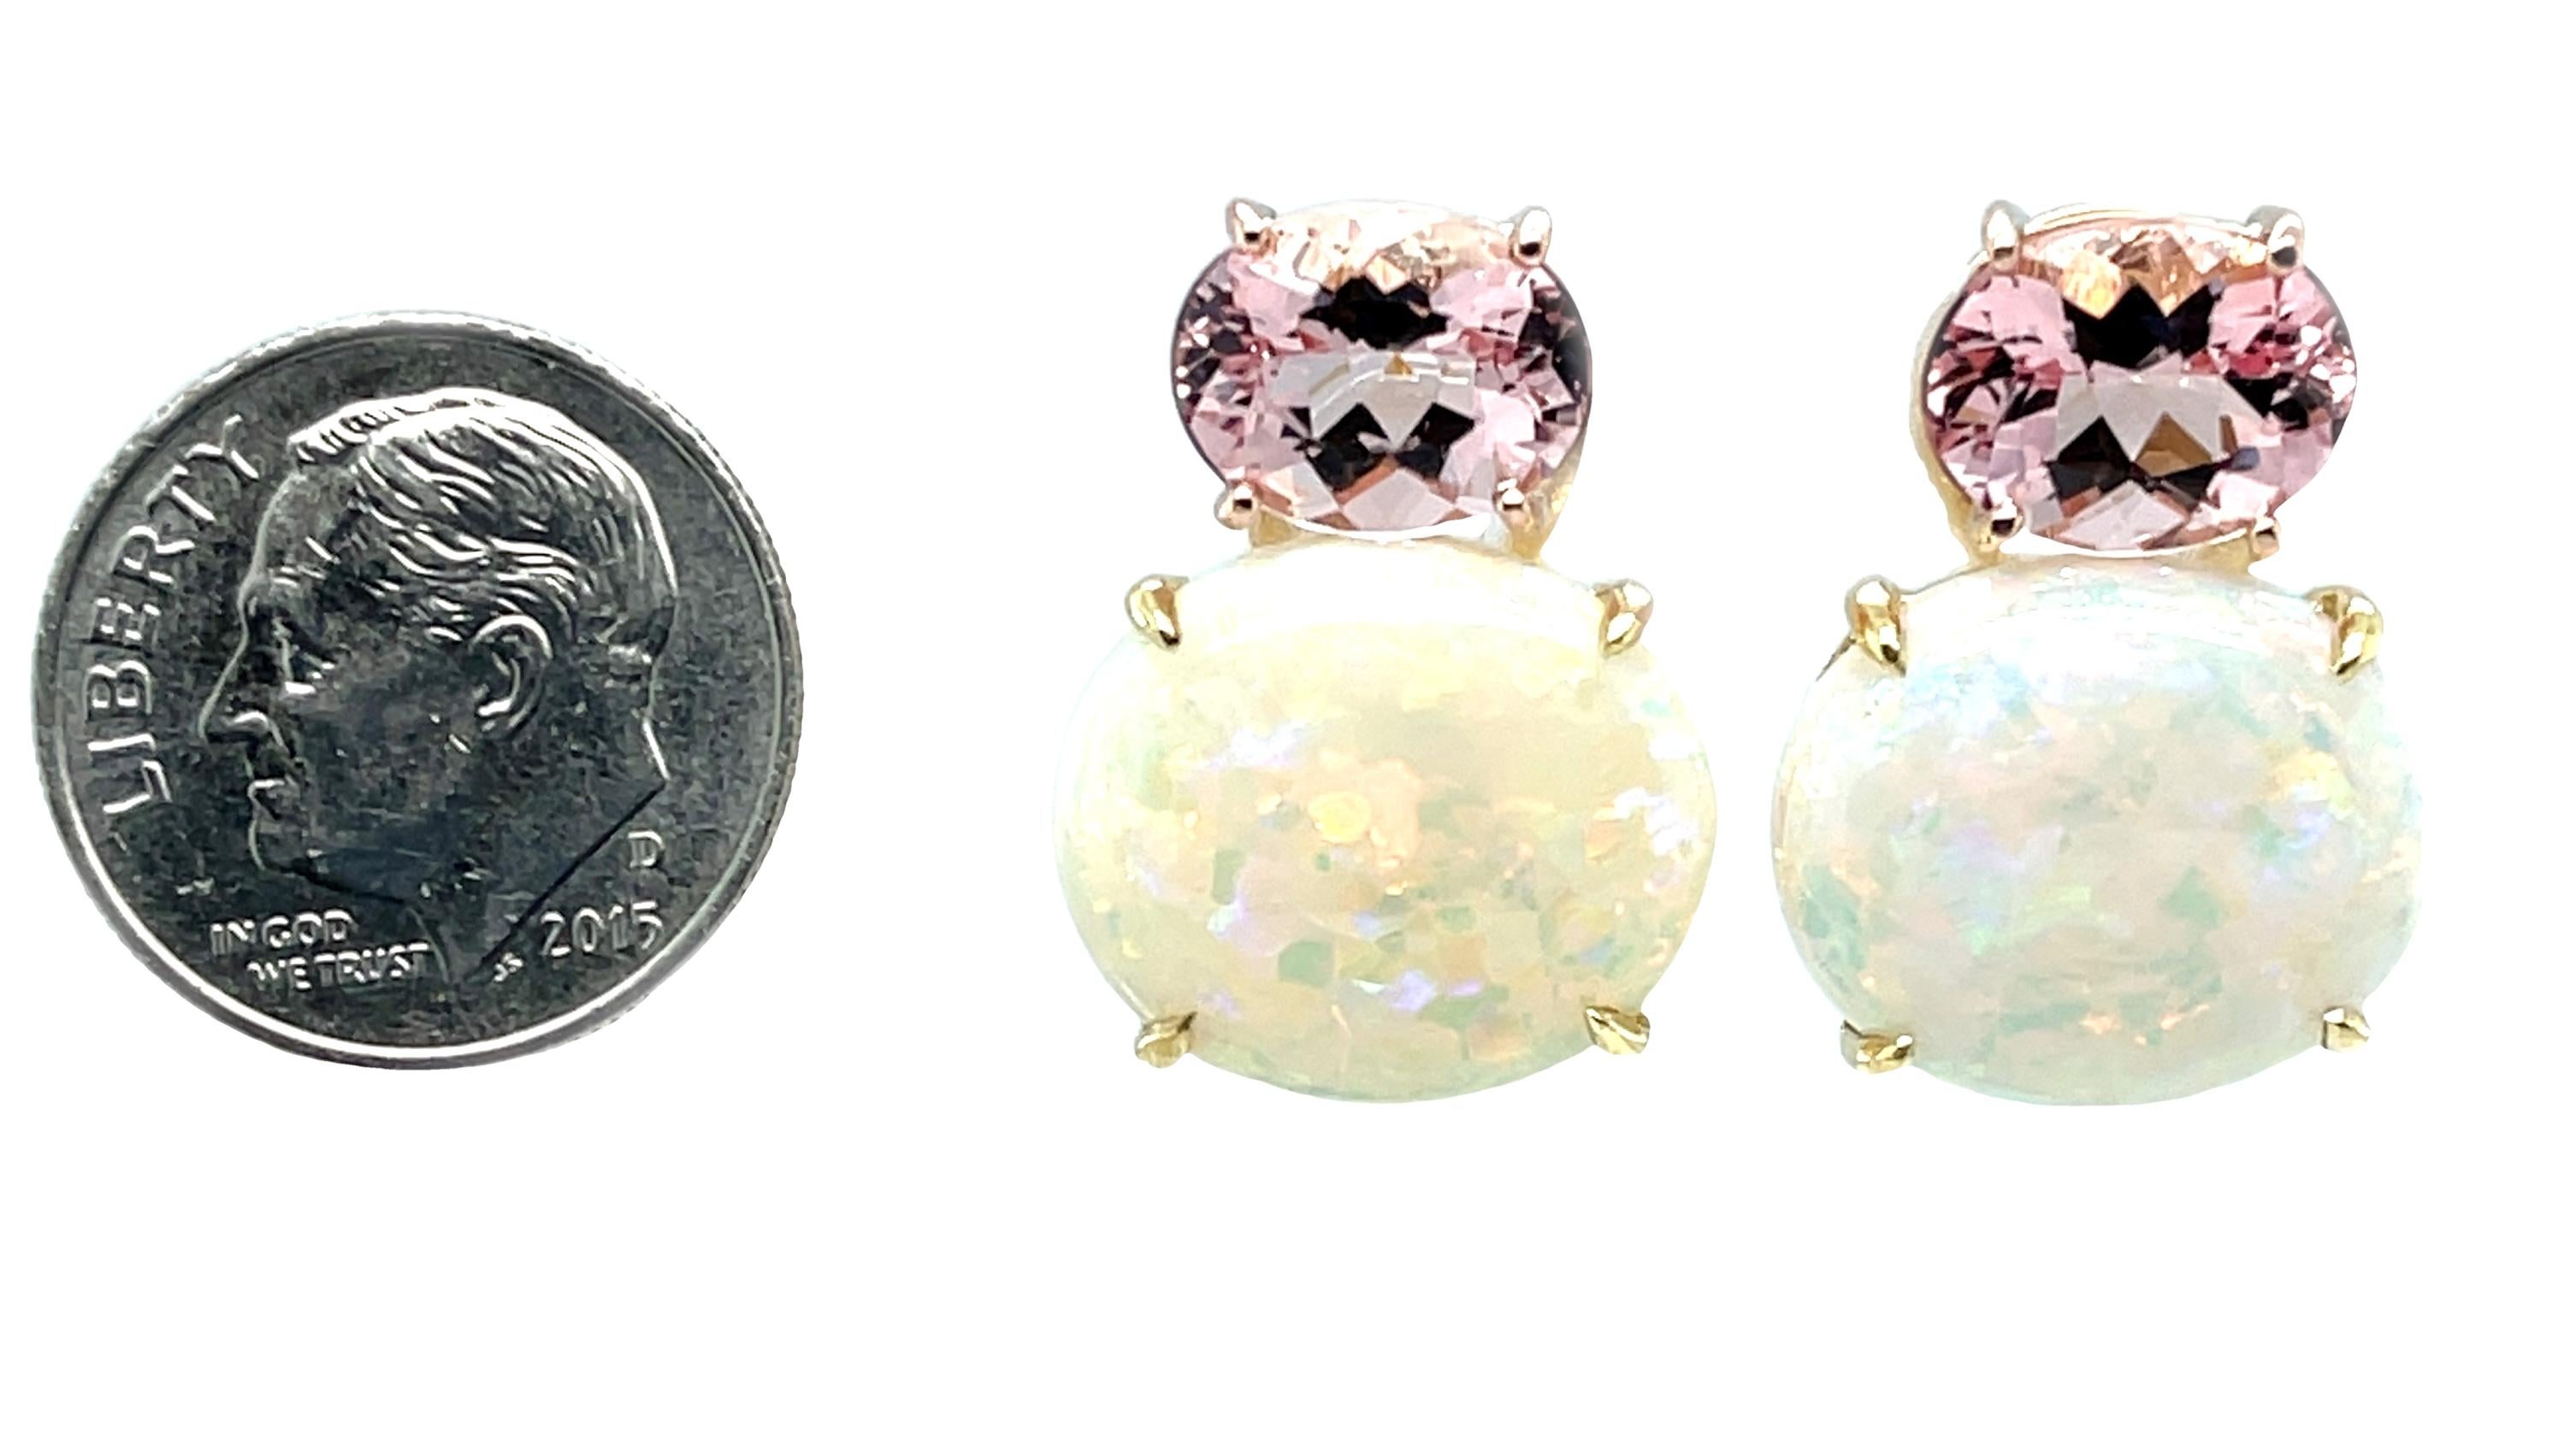 These elegant earrings feature a gorgeous pairing of cherry blossom pink morganite and colorful opals set in 18k gold! The bright pink morganite sparkle in 18k rose gold, while the opals with their rainbow of colors are highlighted in yellow gold. A